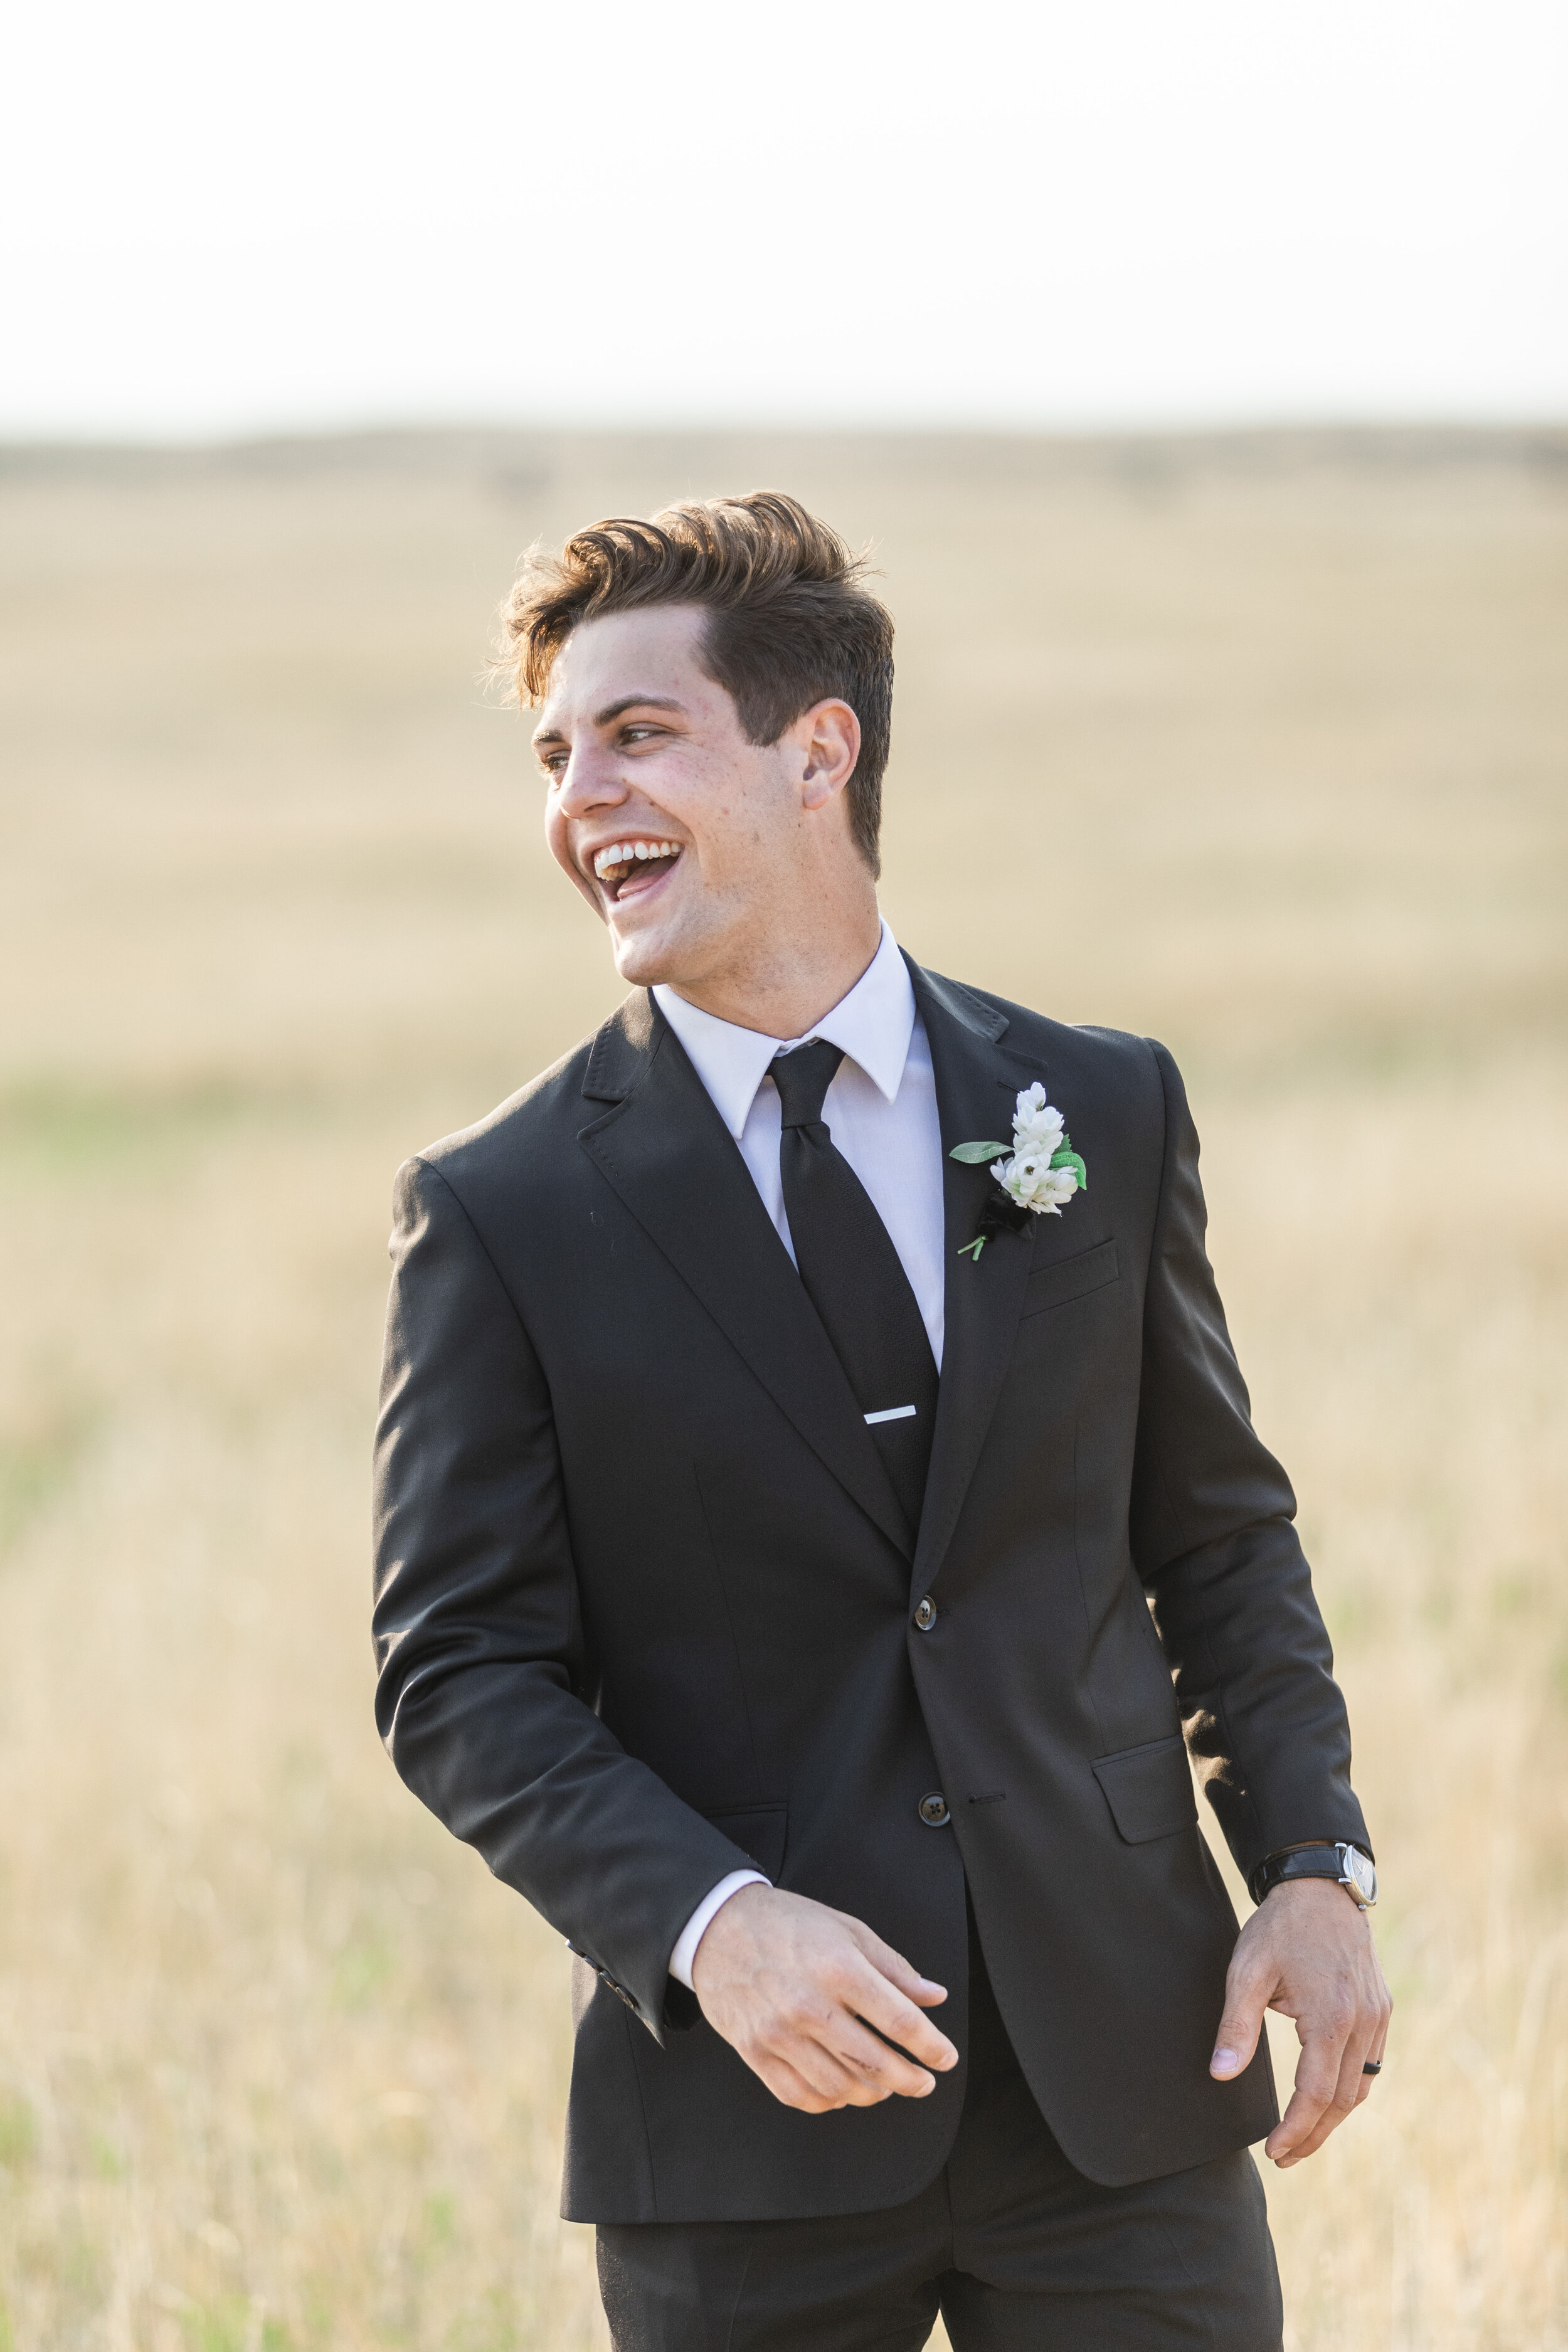  Groom wearing a black suit and black tie standing in a golden grass field at tunnel springs in Salt Lake County by Savanna Richardson Photography. tunnel springs wedding formals black suit on wedding happy groom #savannarichardsonphotography #savann